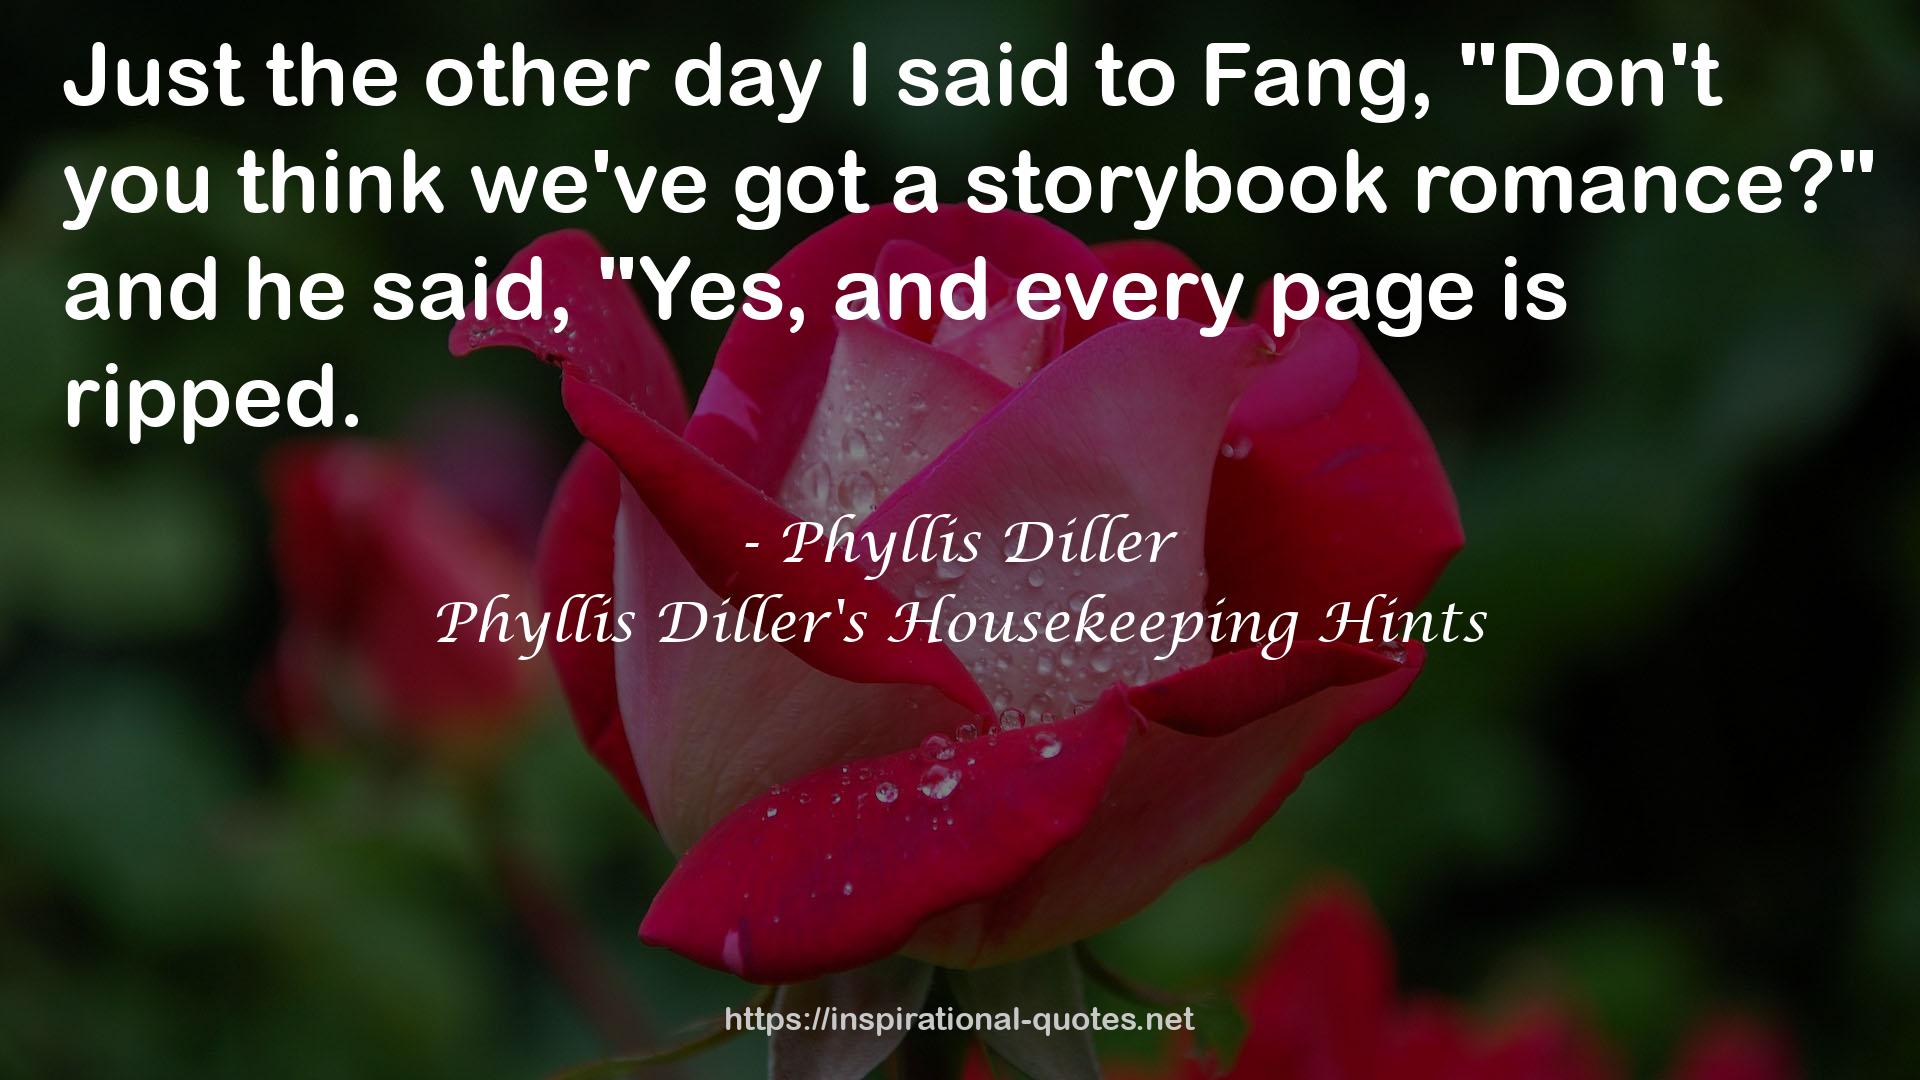 Phyllis Diller's Housekeeping Hints QUOTES